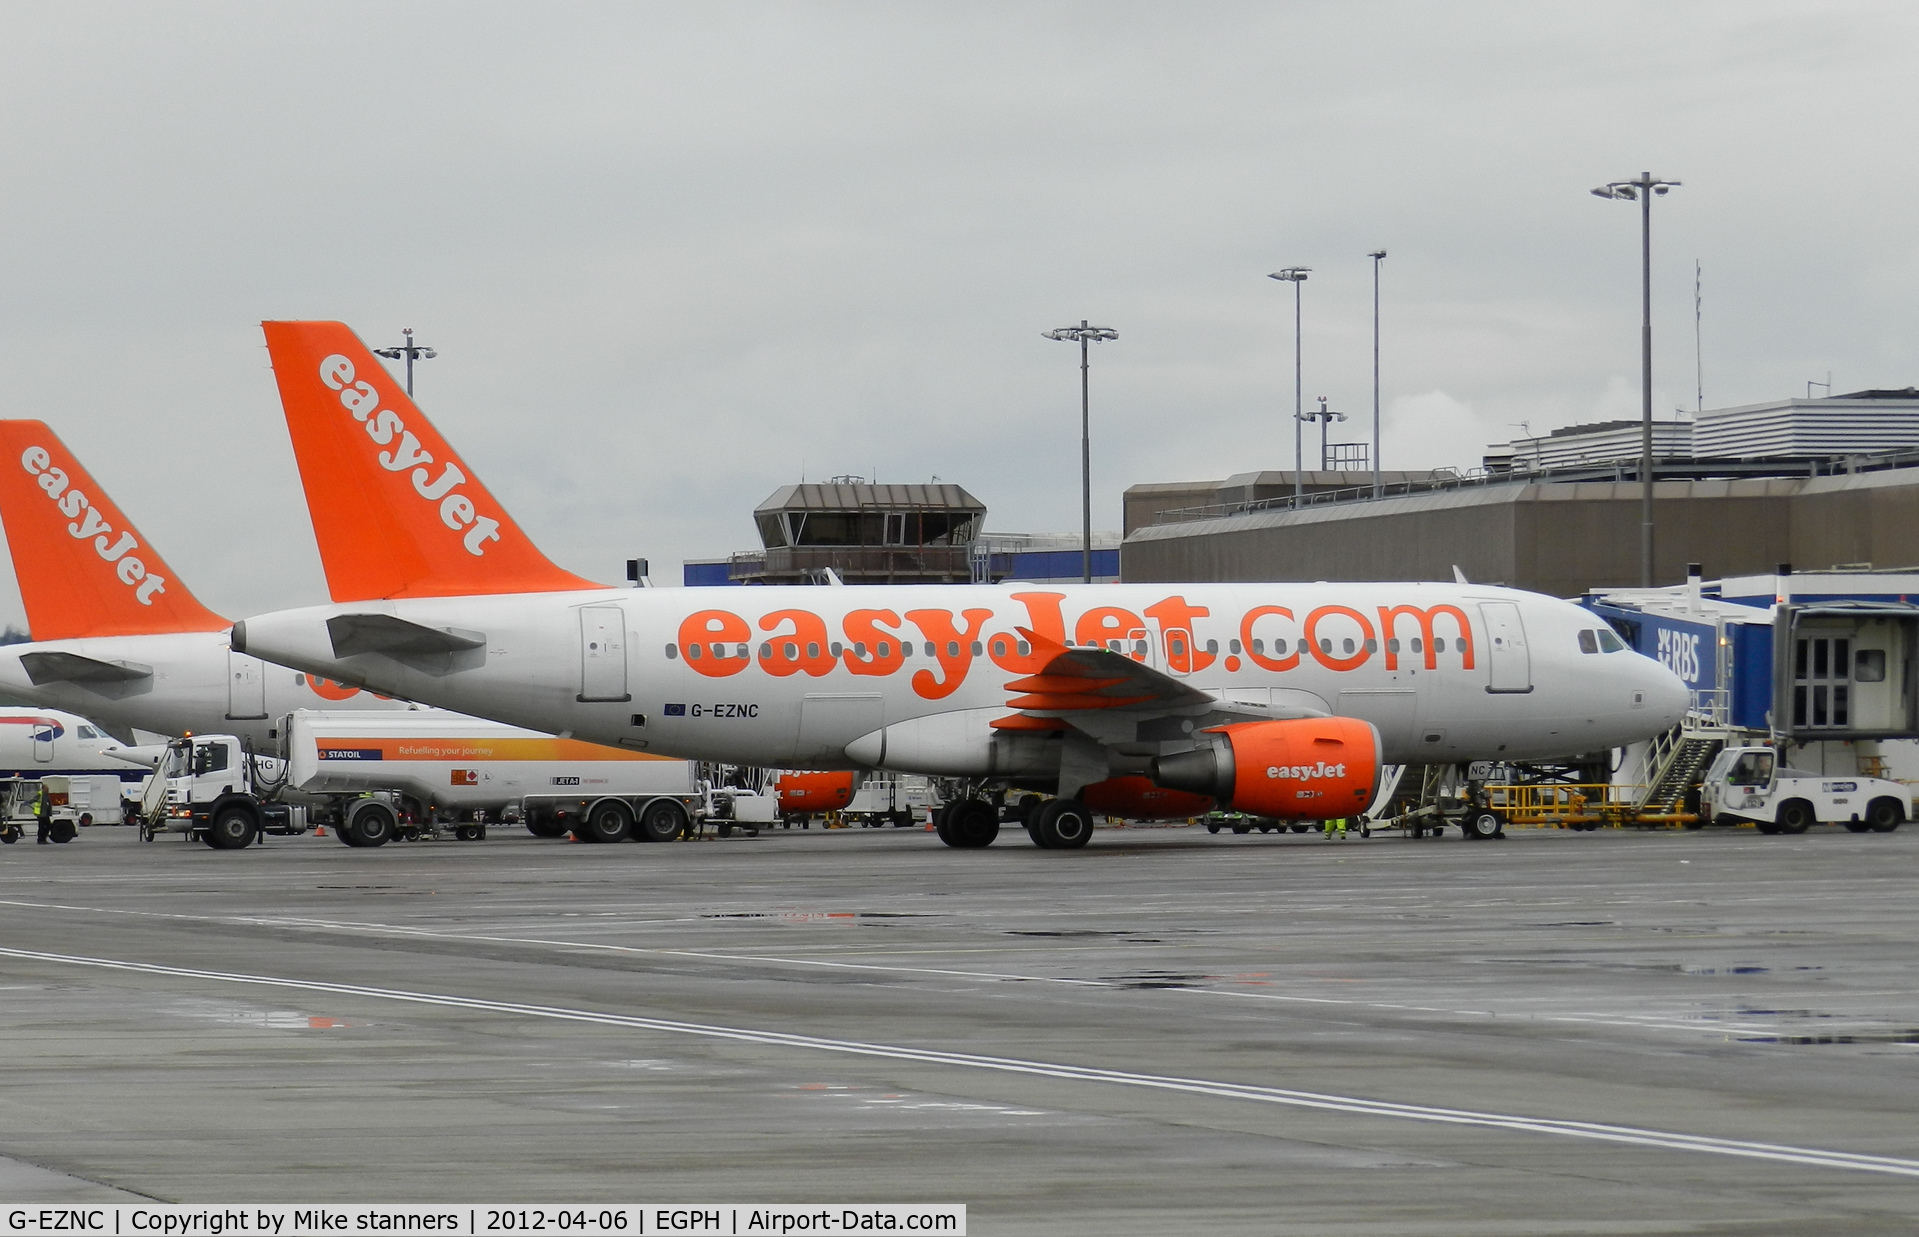 G-EZNC, 2003 Airbus A319-111 C/N 2050, Easyjet A319 on the international arrivals terminal having just arrived from Madrid